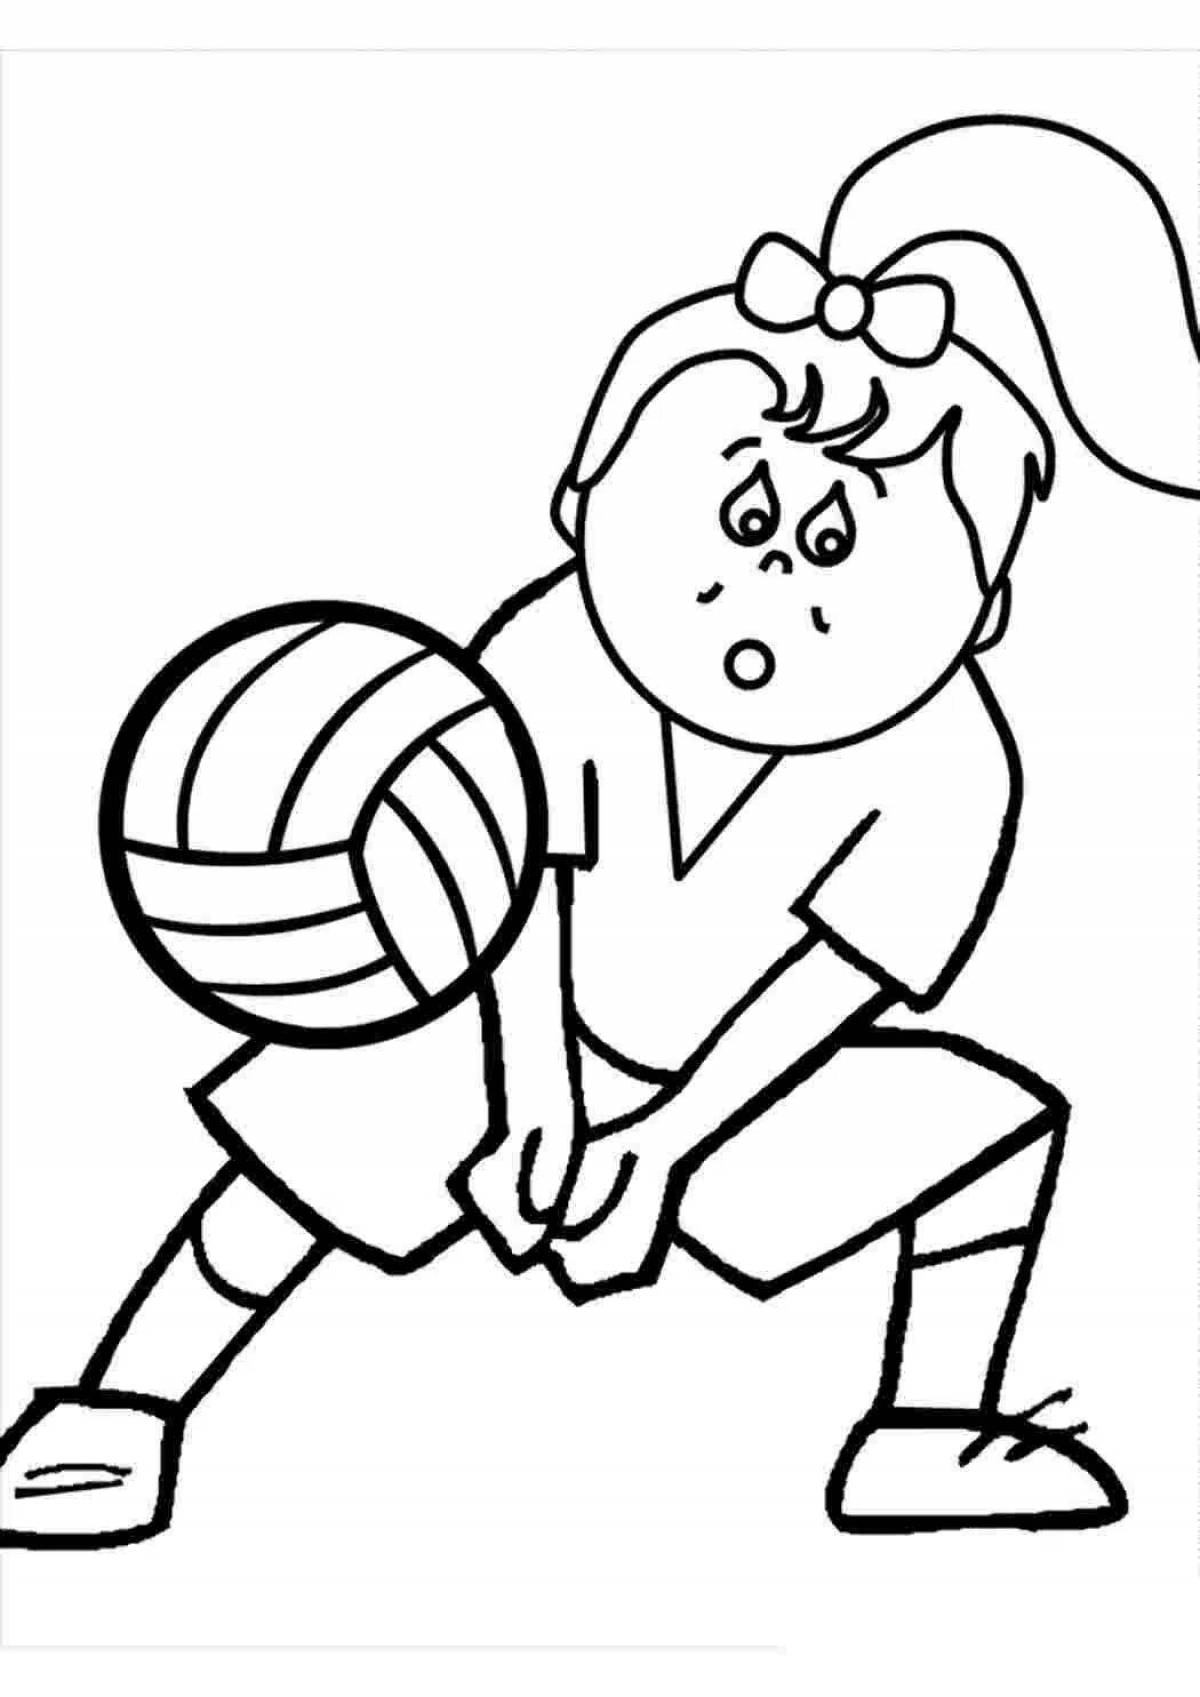 Colorful volleyball coloring book for adults